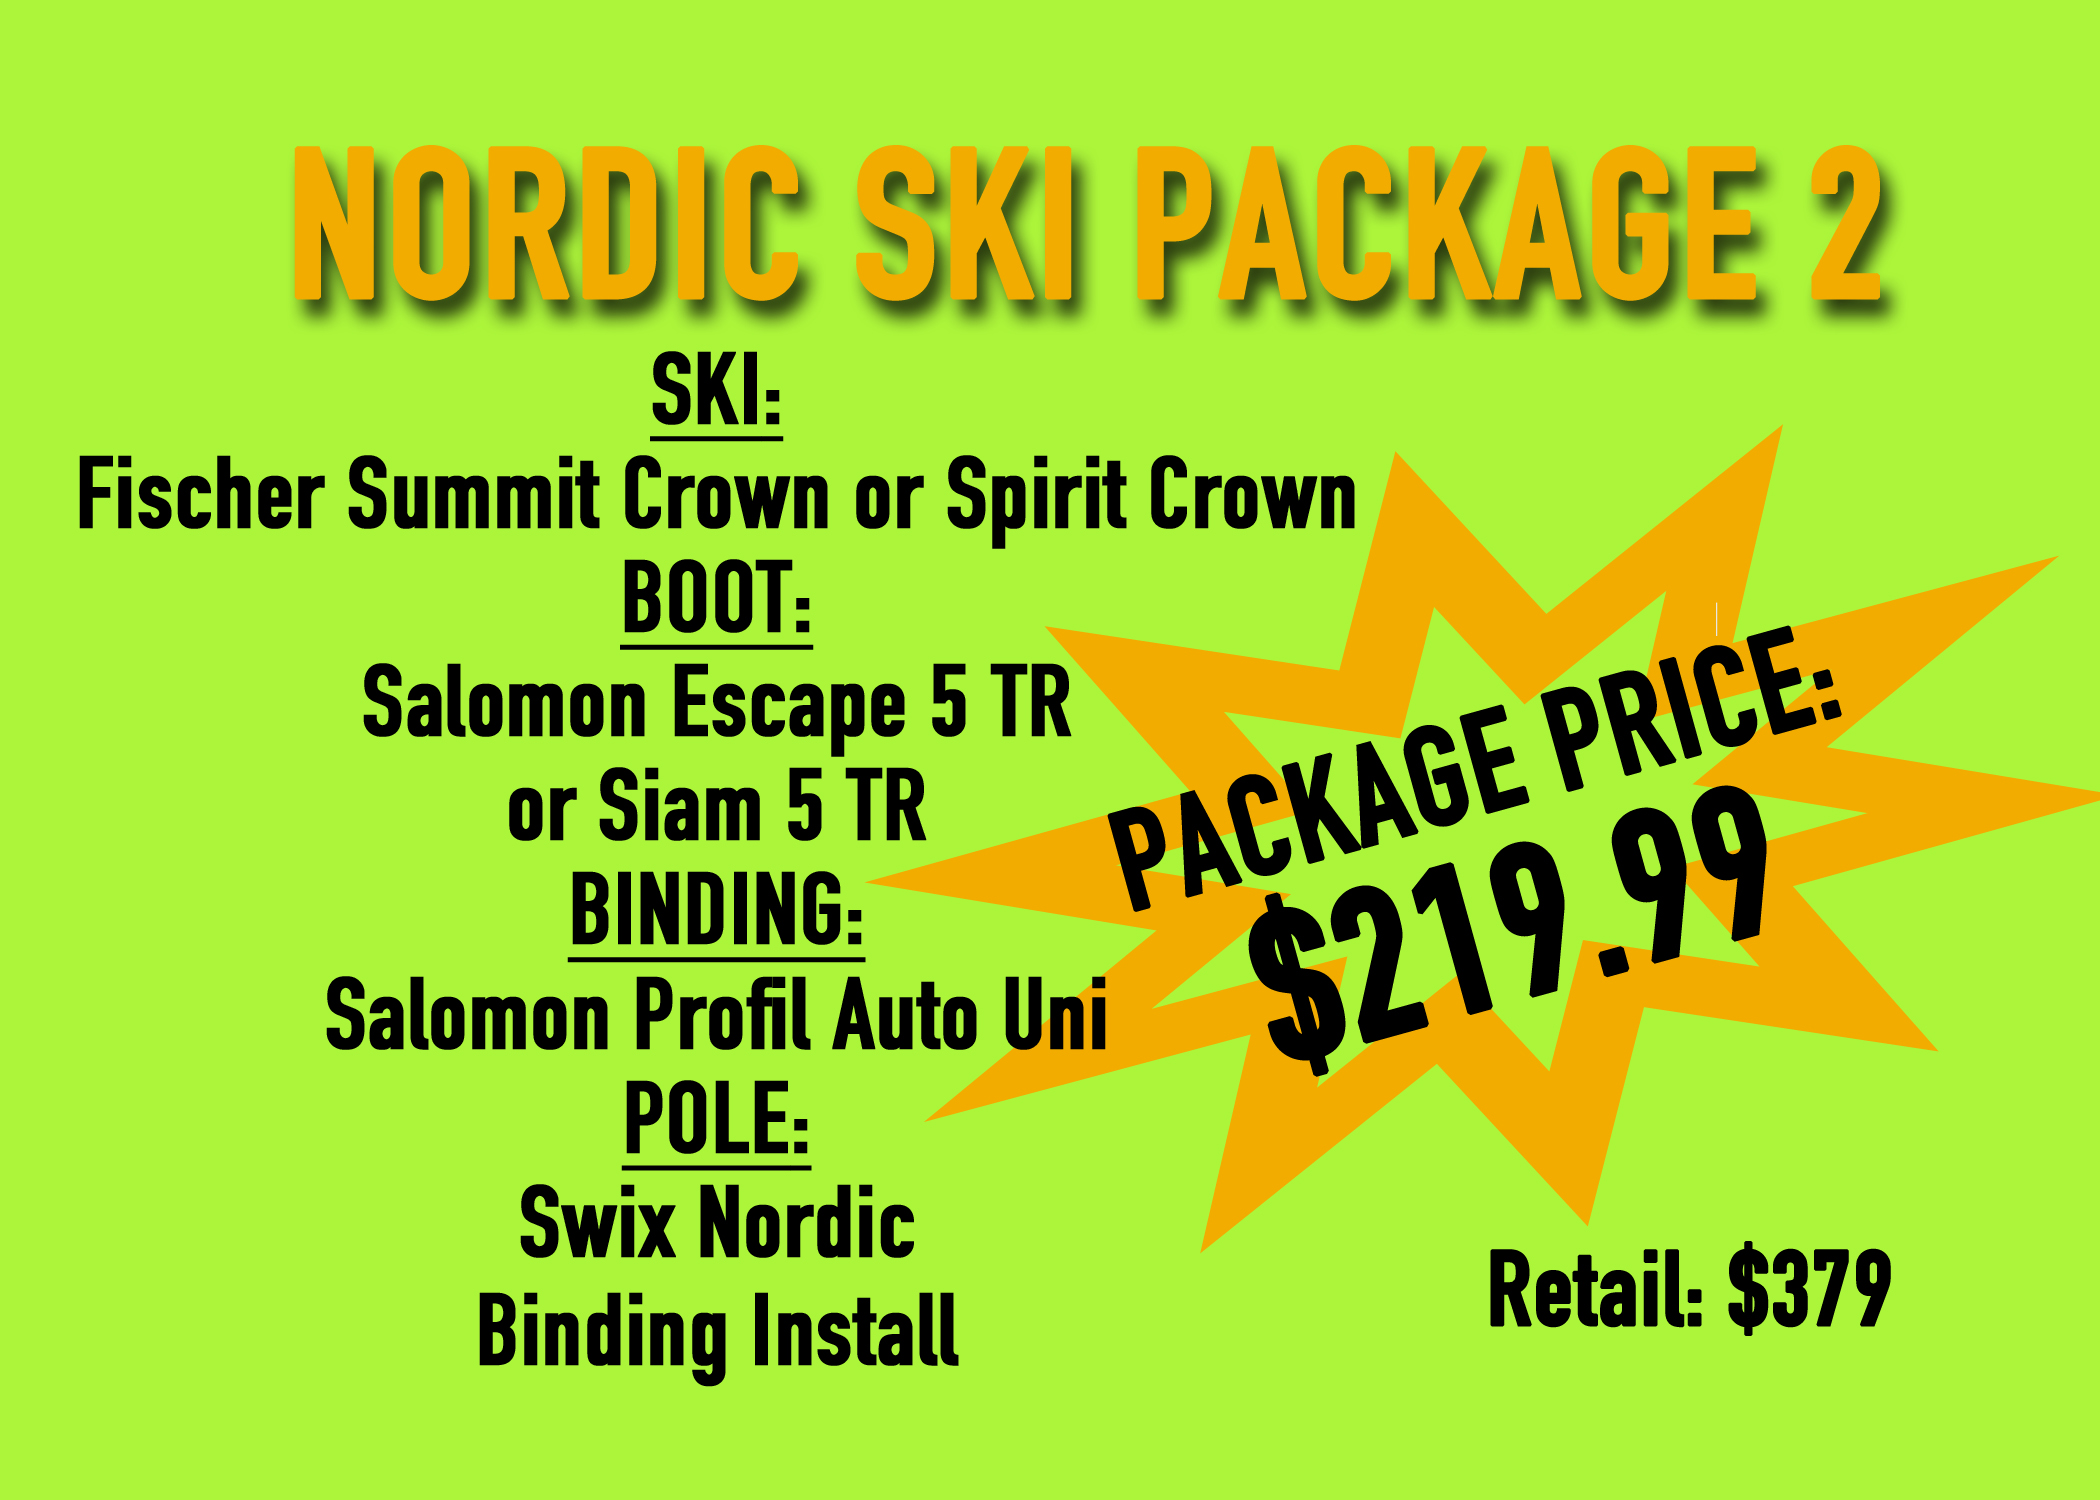 Ski & Snowboard Packages at Shepherd & Schaller Outdoors Starts In Here